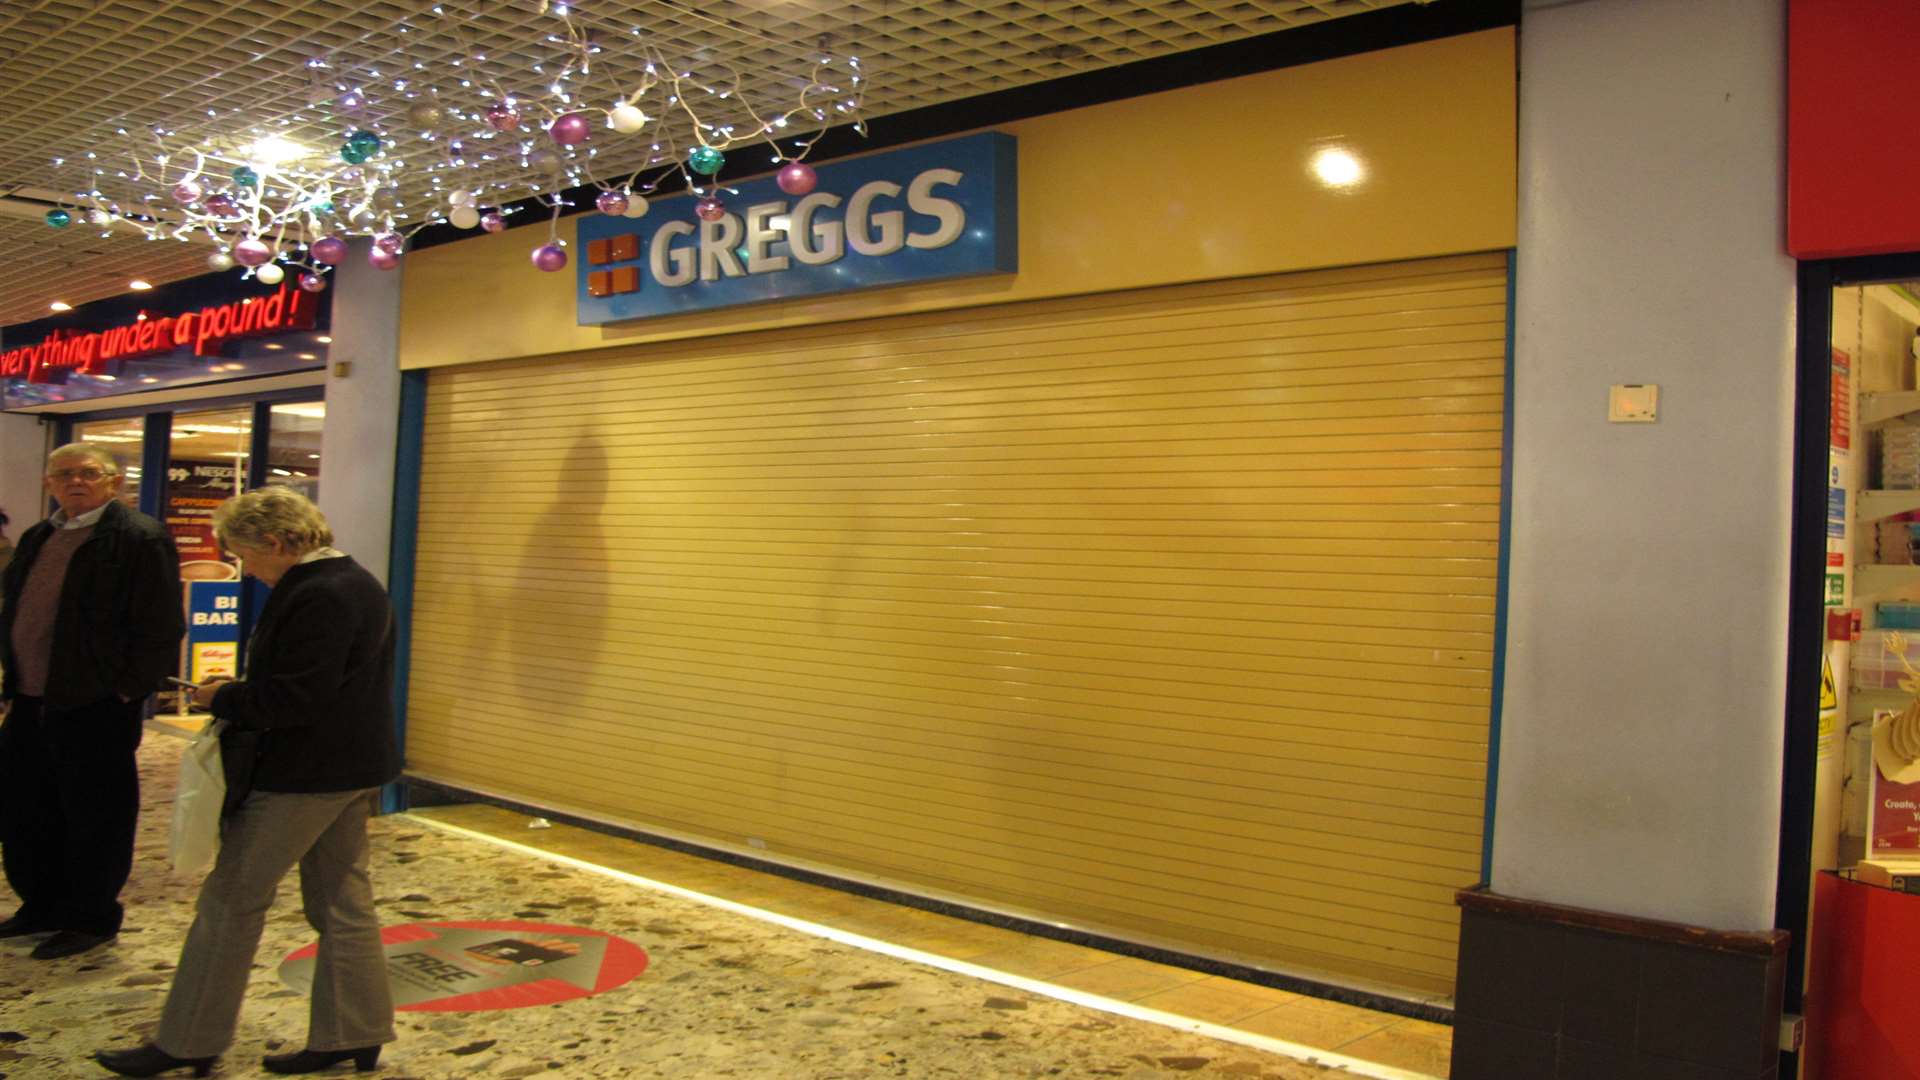 The mouse reportedly fell through the ceiling at Greggs